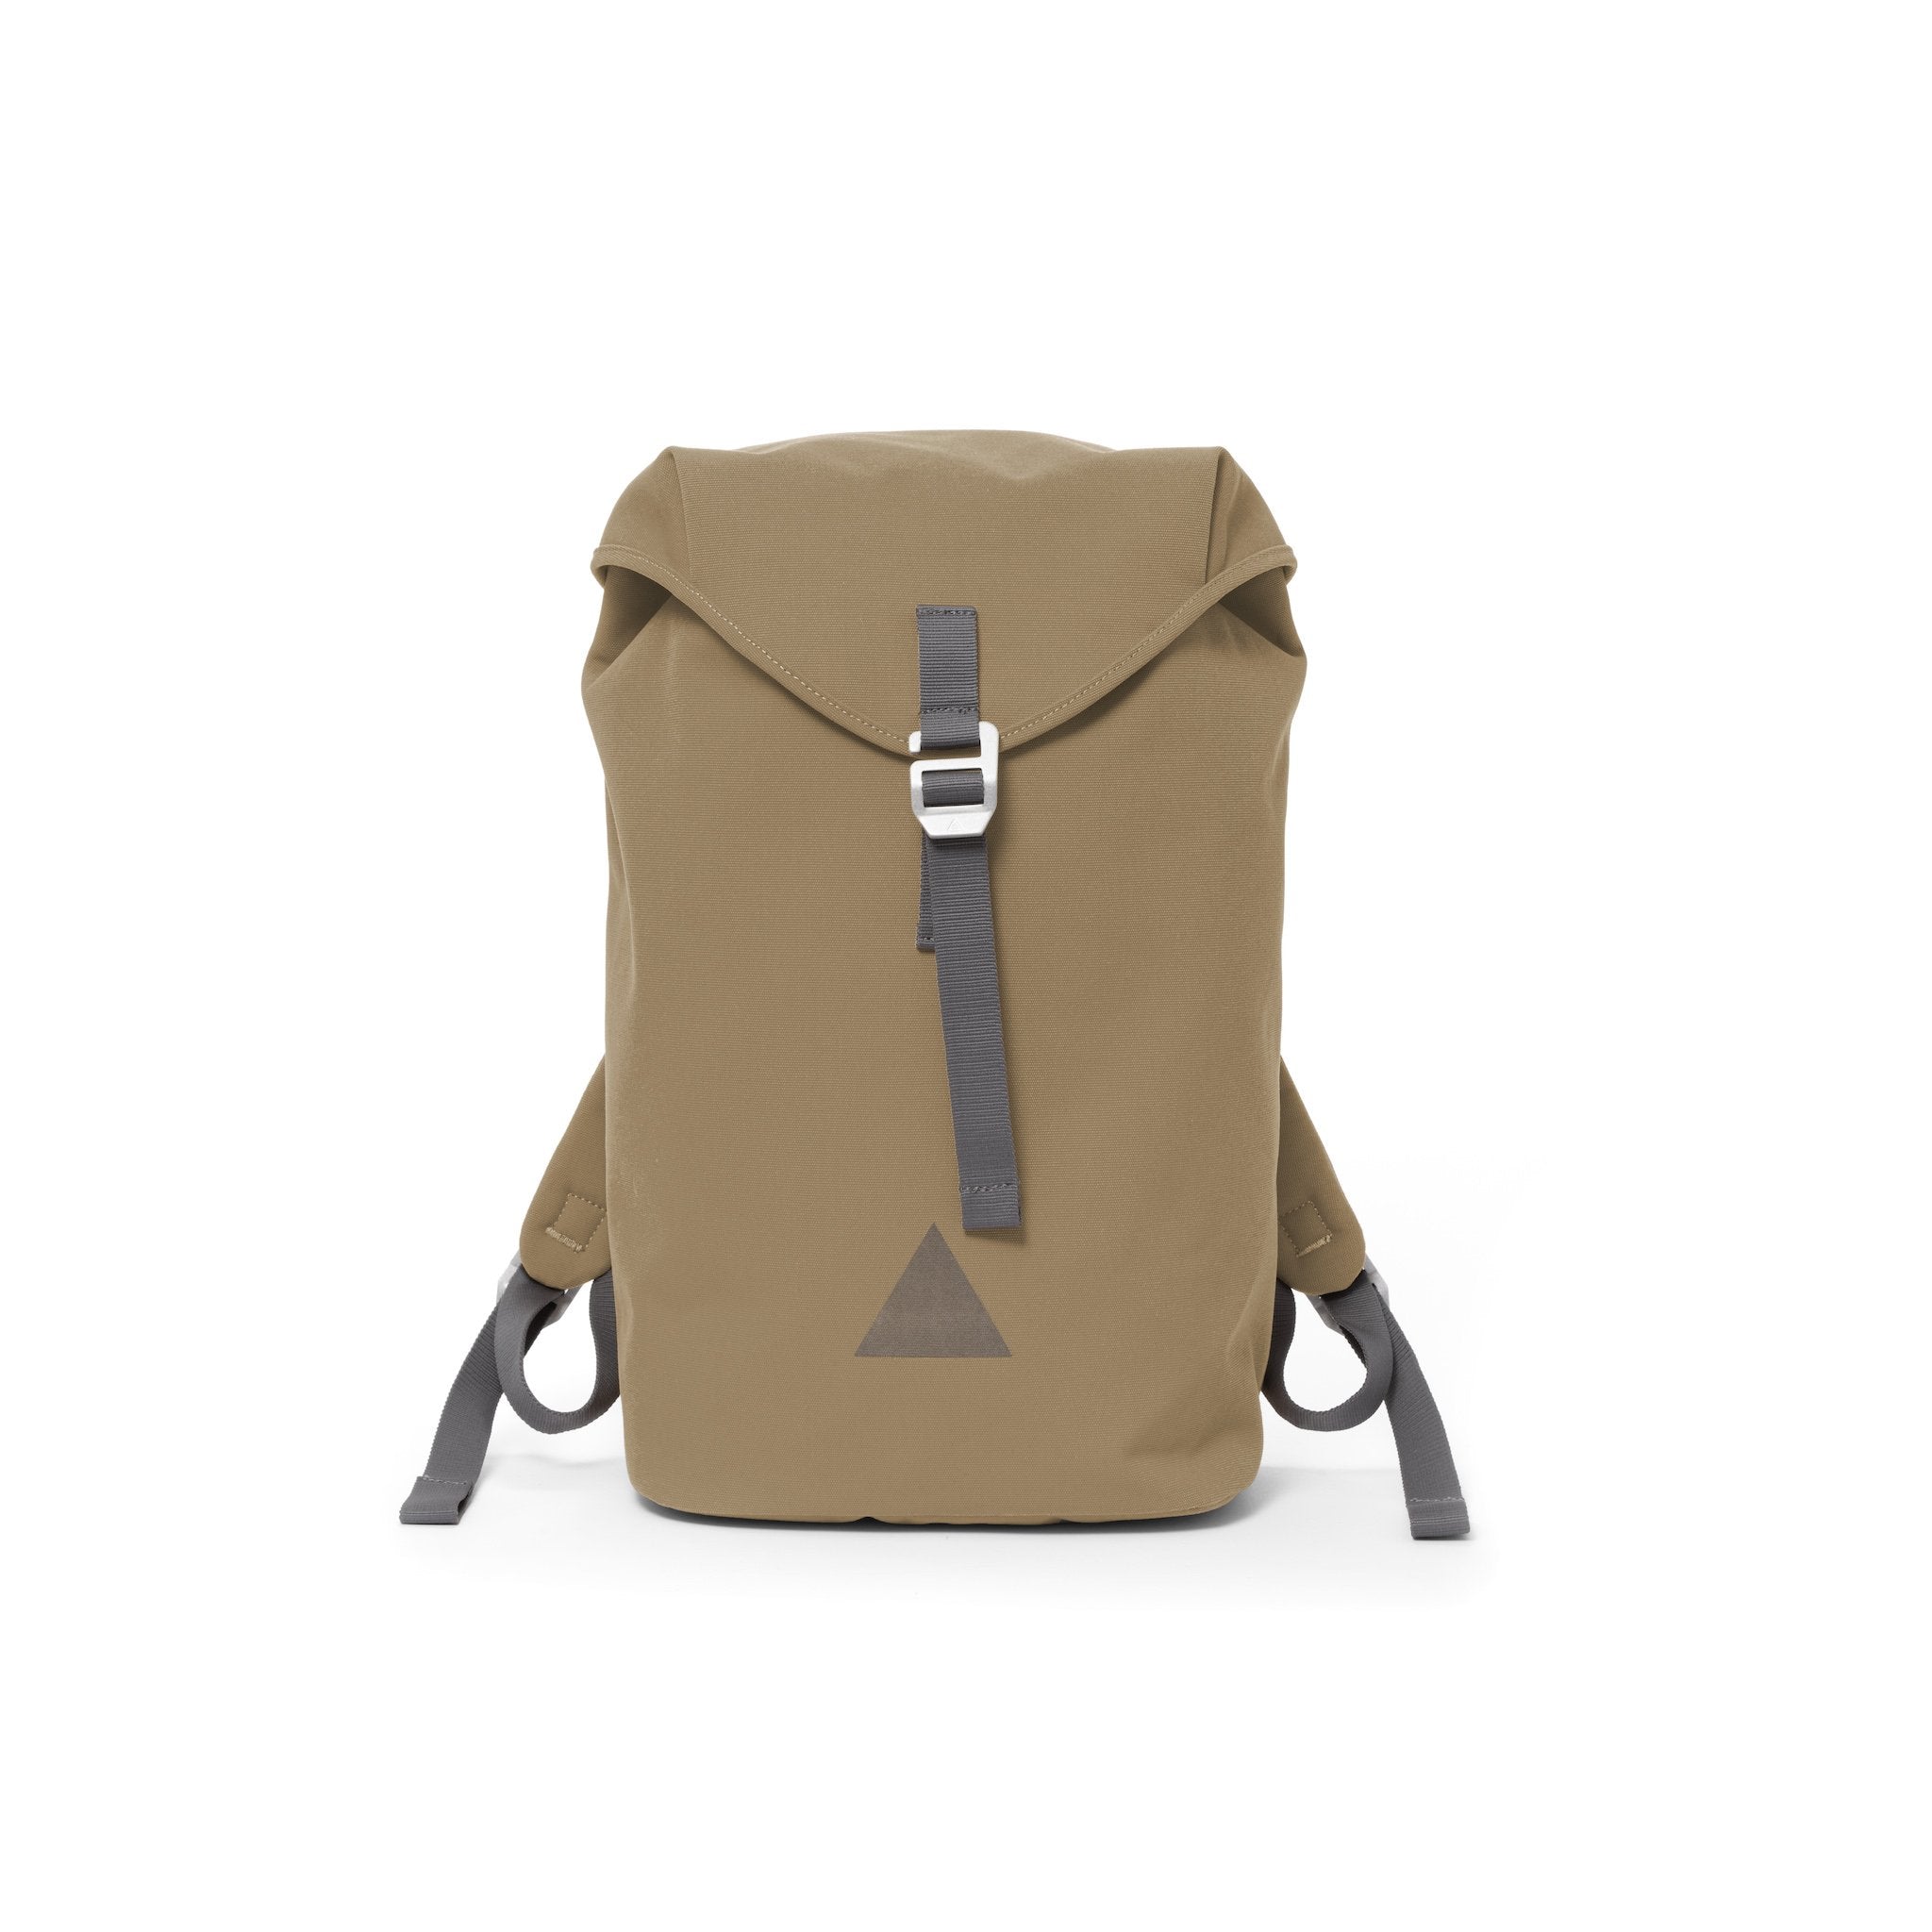 Khaki canvas backpack with a flap closure and triangle logo.